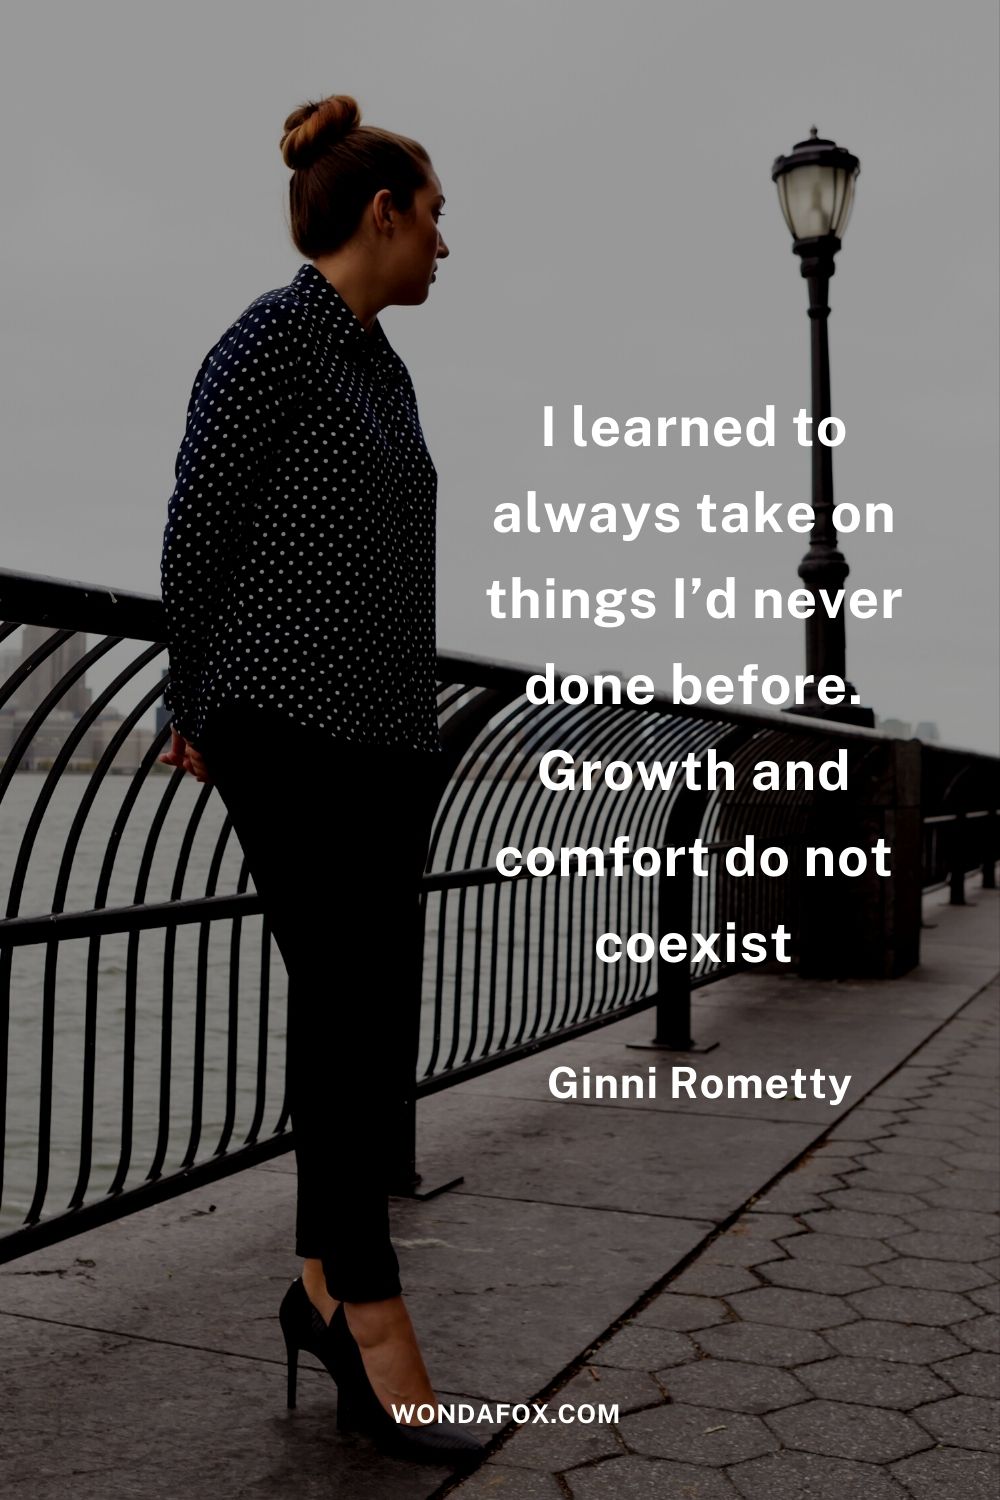 I learned to always take on things I’d never done before. Growth and comfort do not coexist